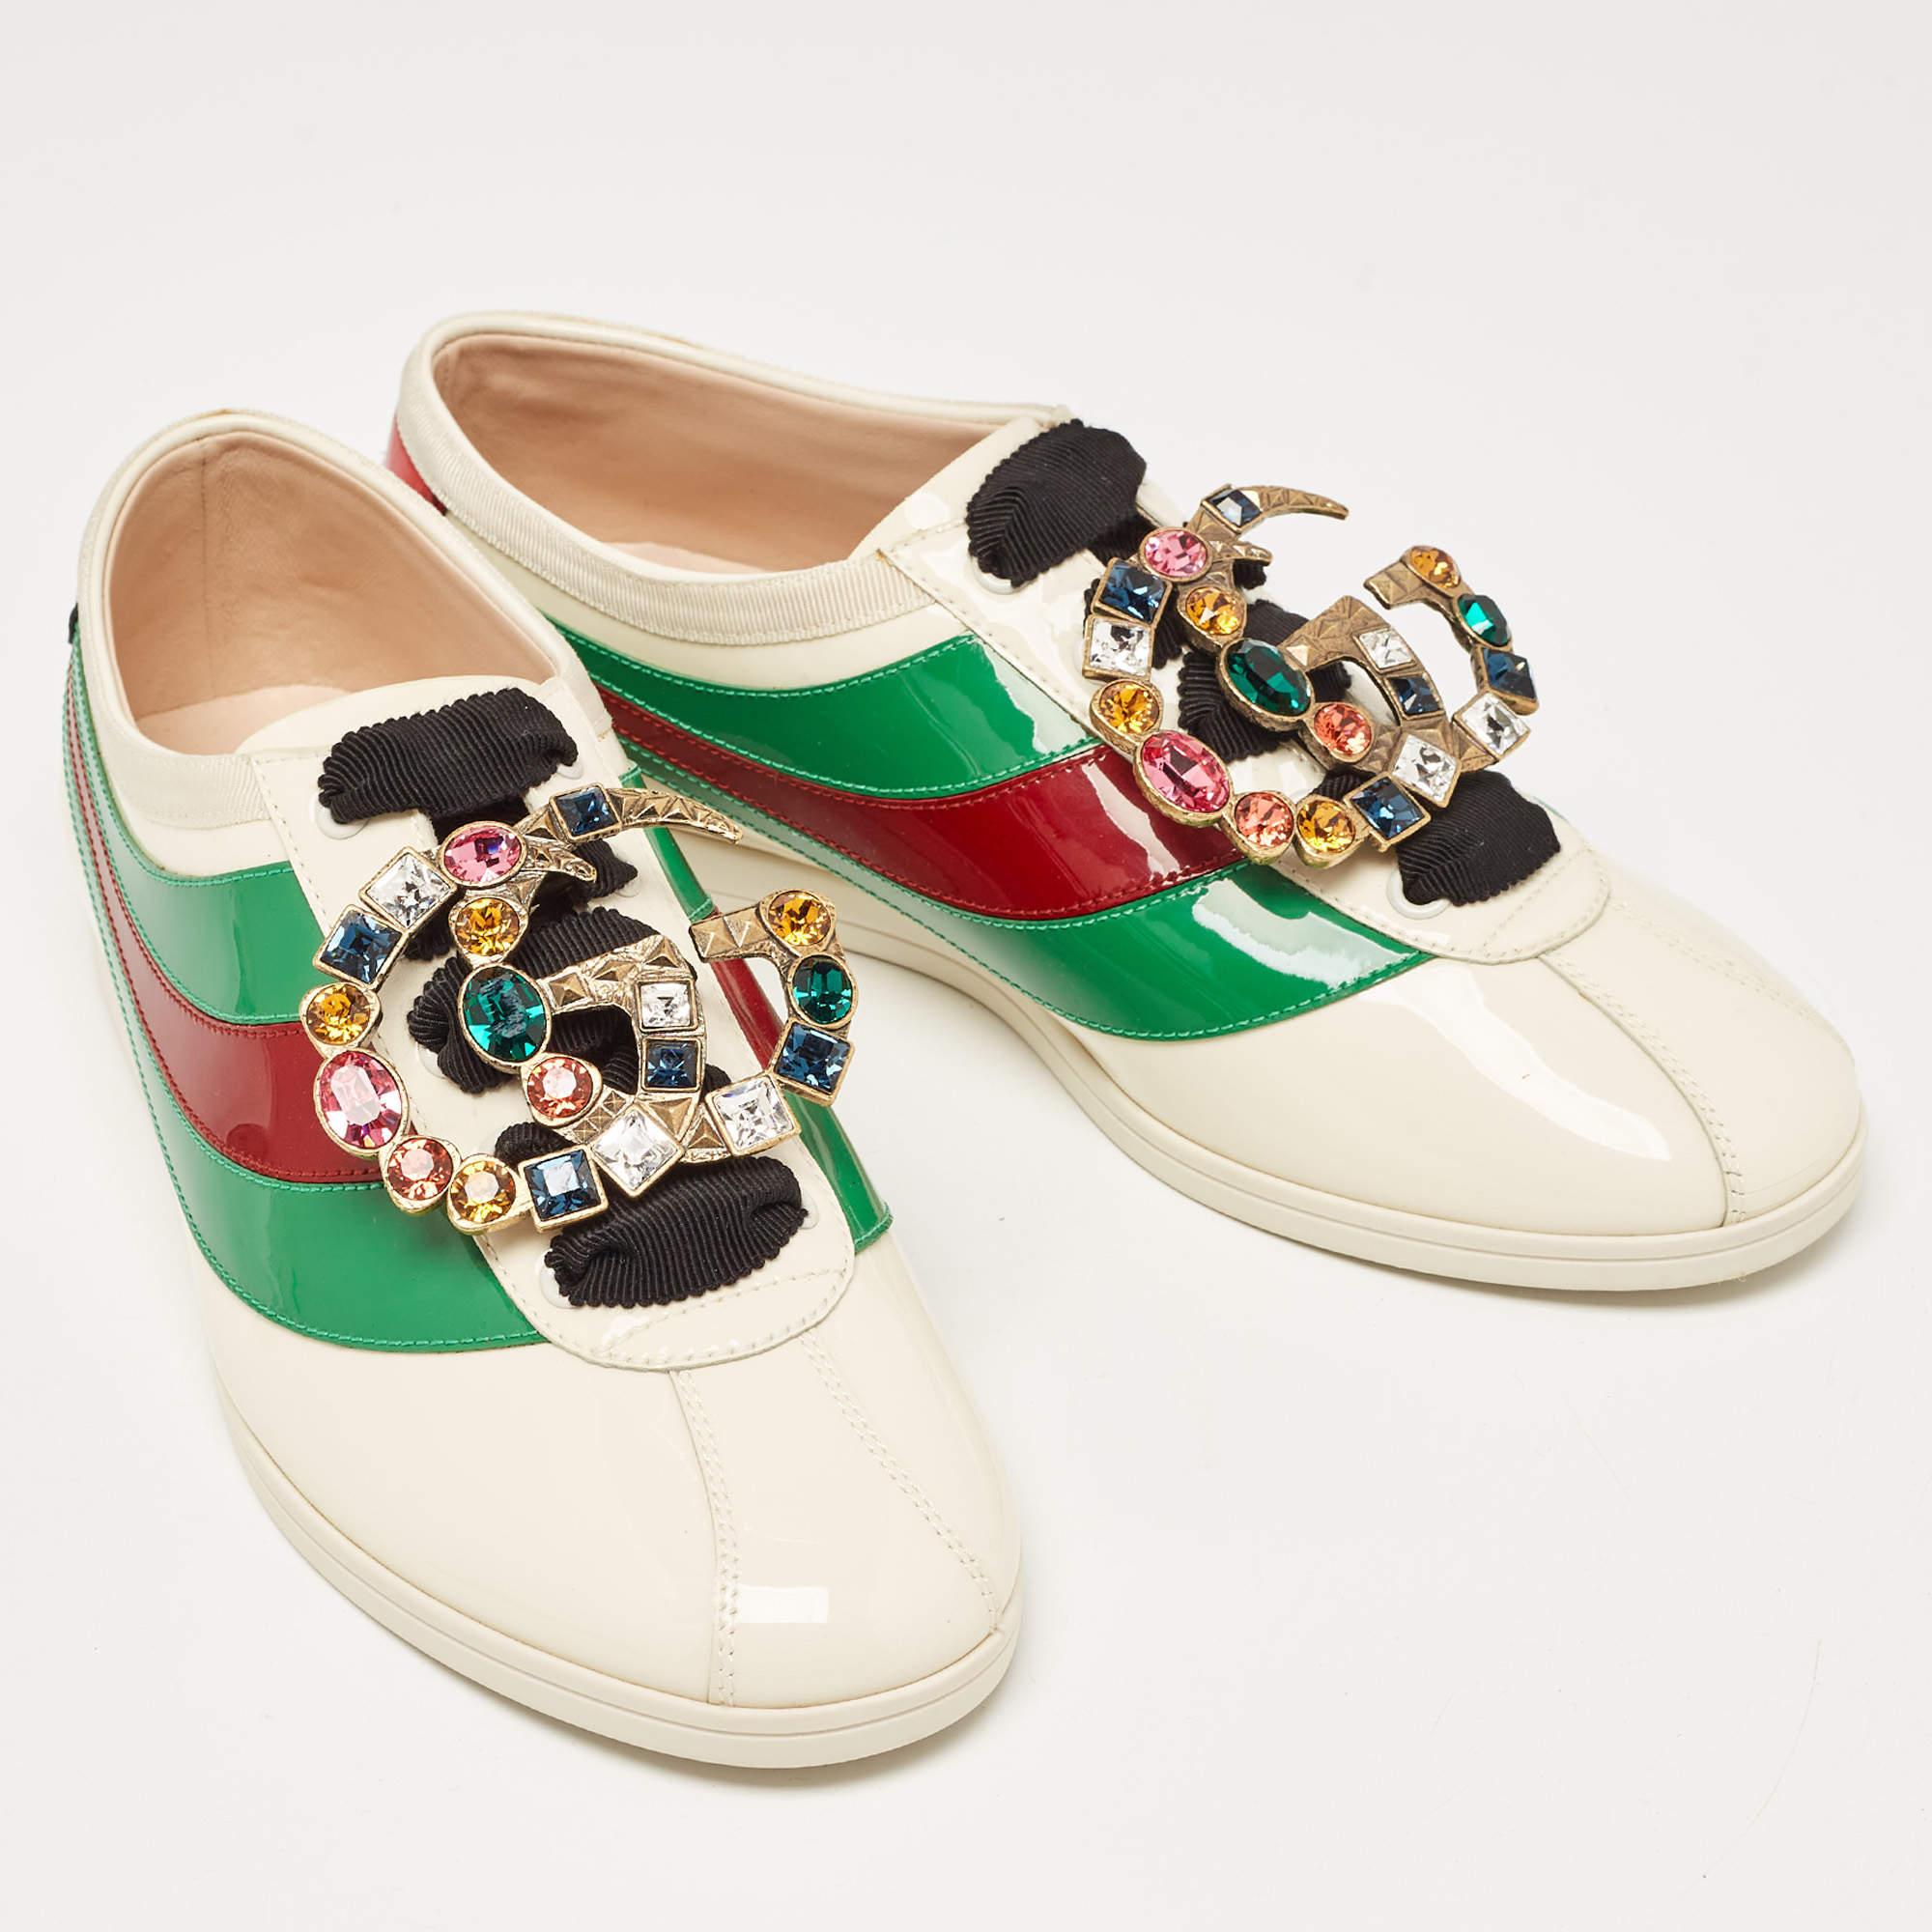 Gucci Tricolor Patent Falacer Crystal Embellished Low Top Sneakers Size 38 In Excellent Condition For Sale In Dubai, Al Qouz 2